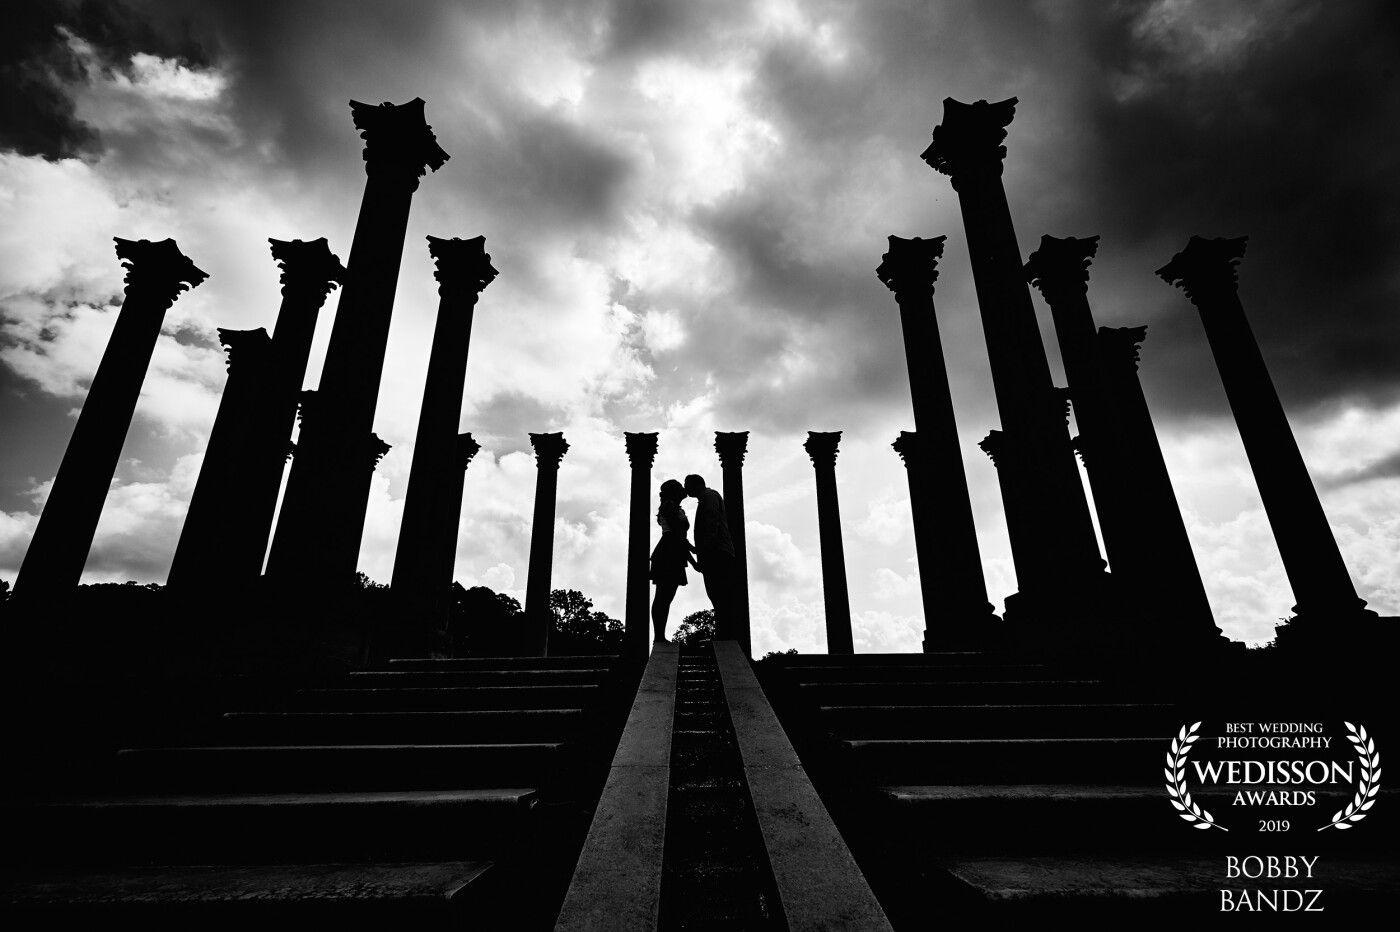 Sometimes people think the clouds aren't good for a photo session but in our case we love the elements because it tells the true story of the day! It was sunny and then the clouds rolled in so it was only fitting to make this photo a little more epic especially with the columns and that kiss!